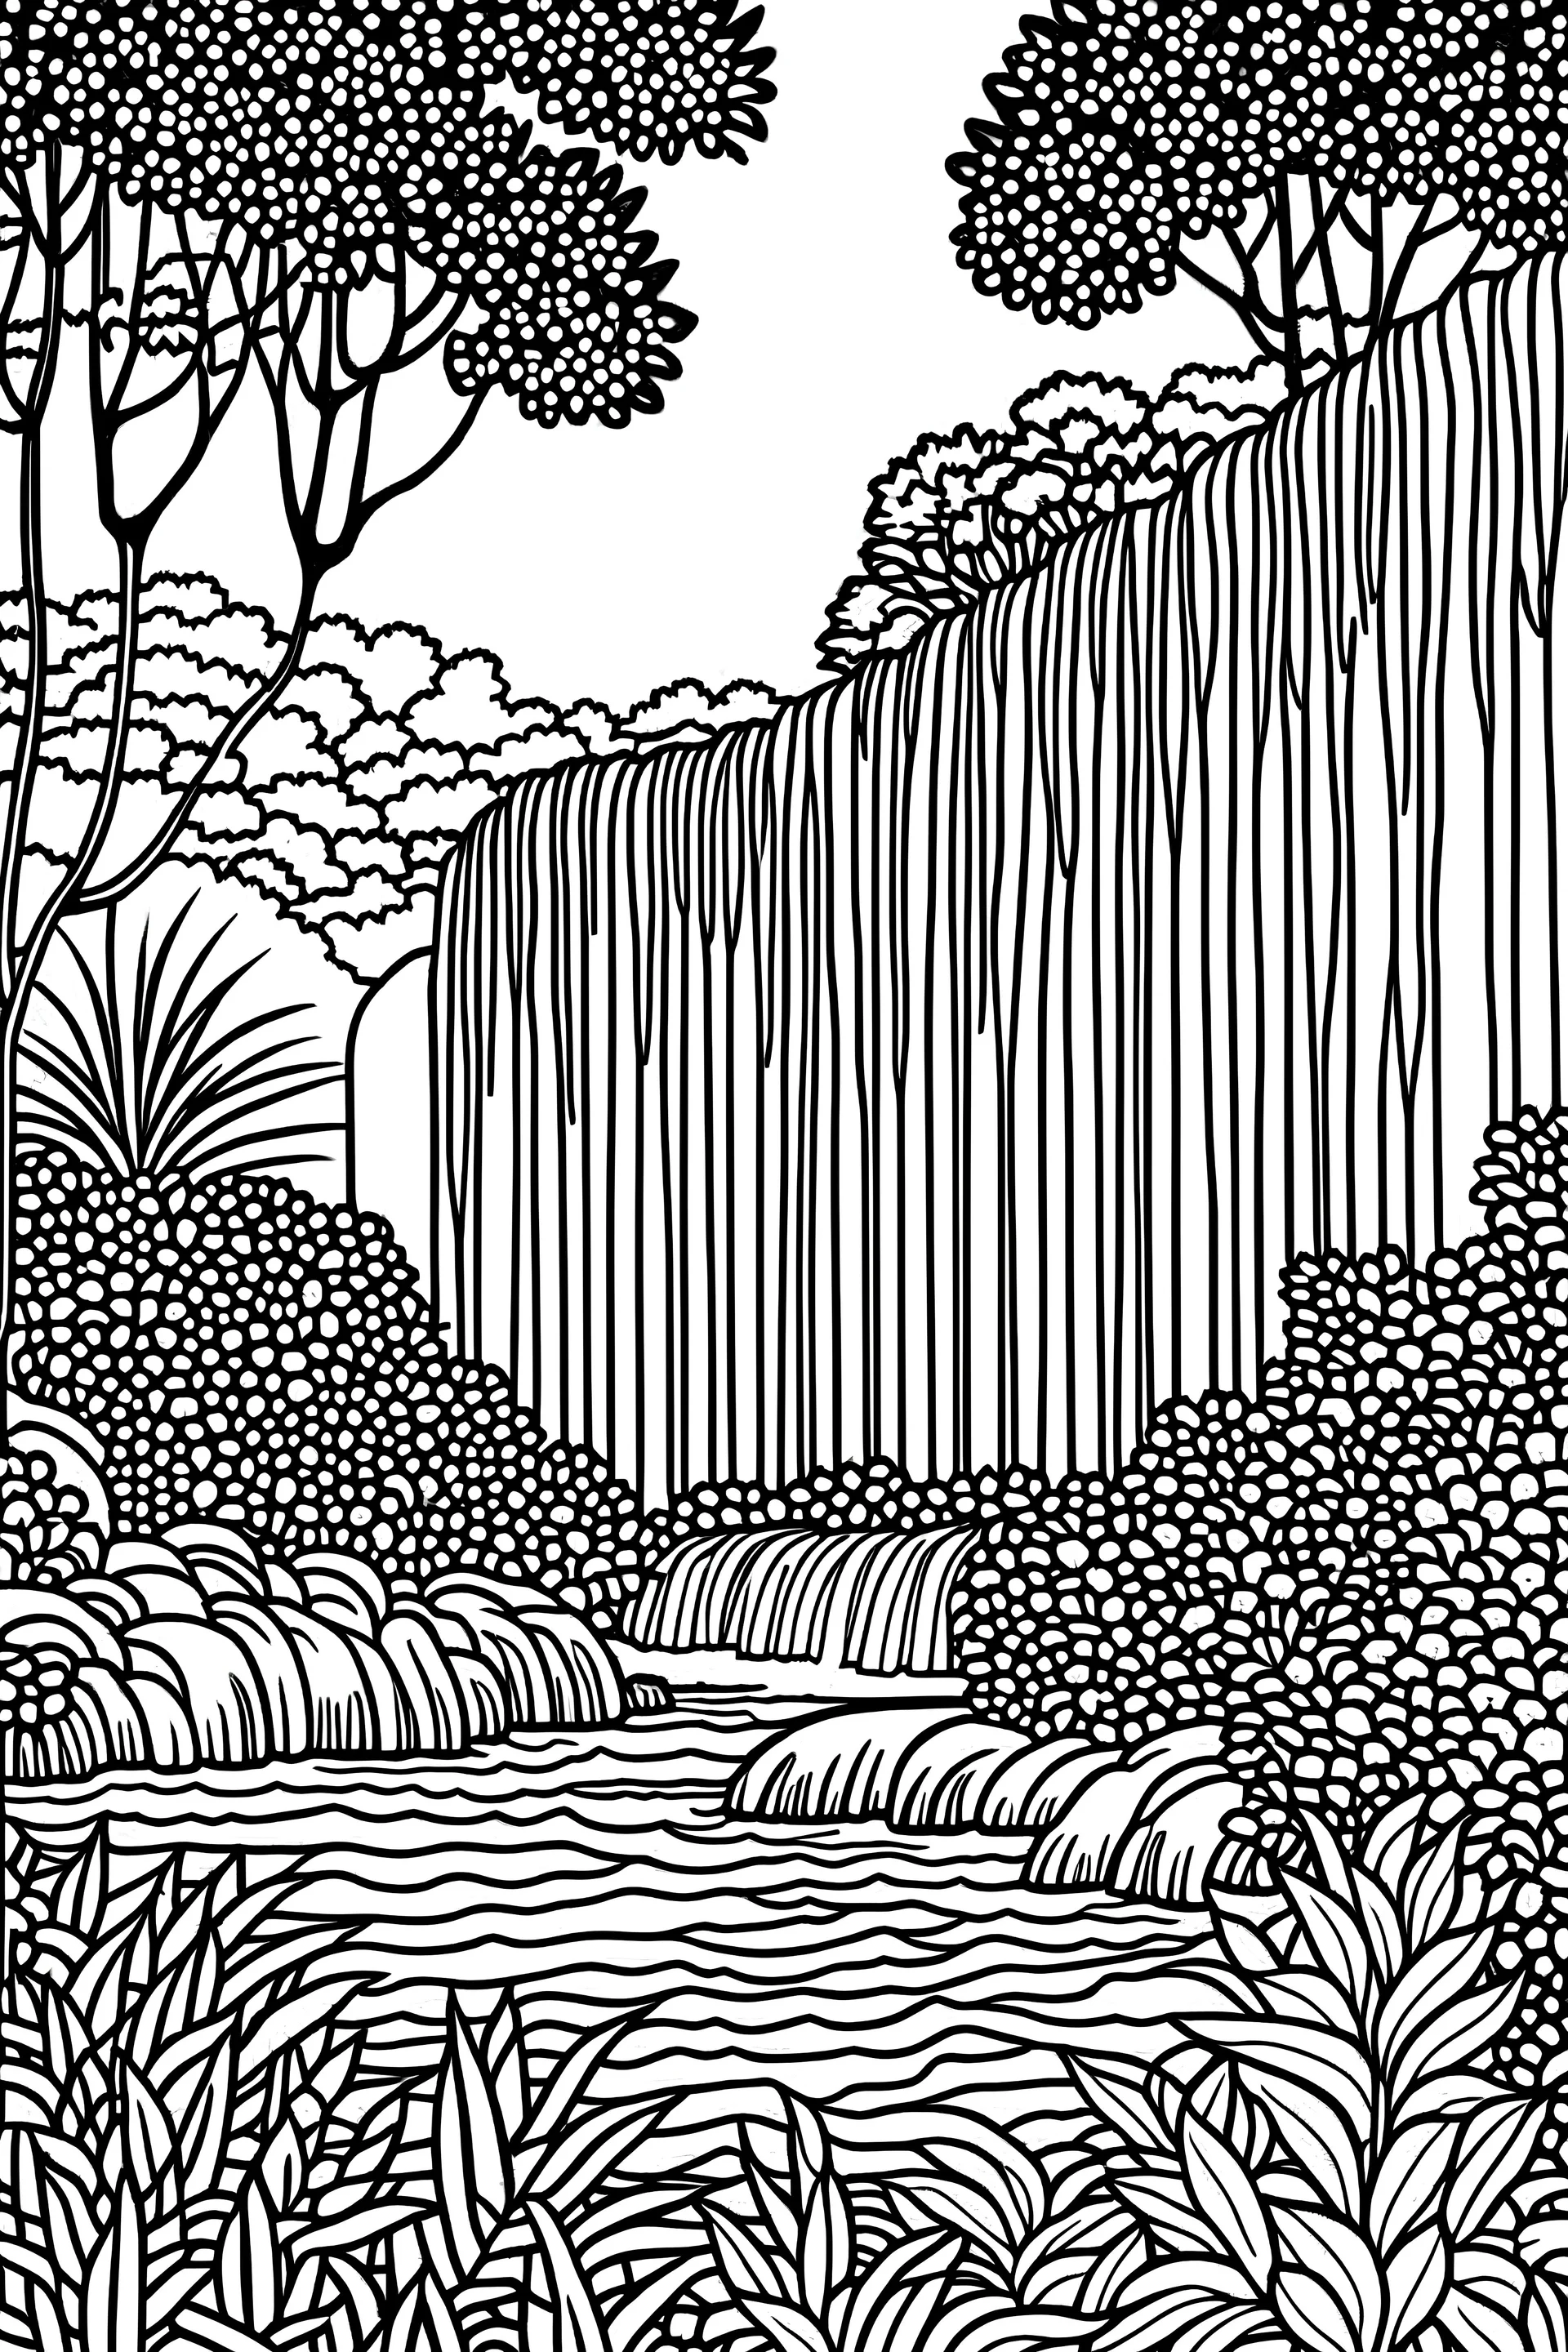 outline art, waterfall in the jungle